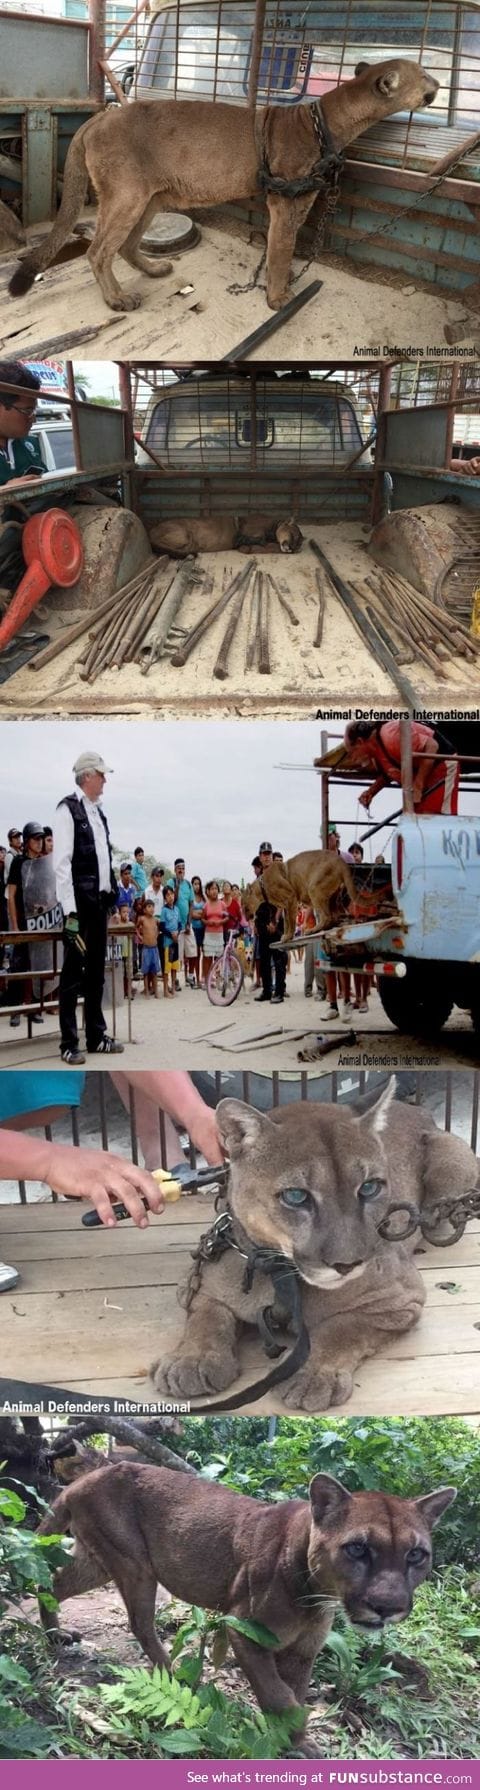 20 years in a circus in peru, Free now